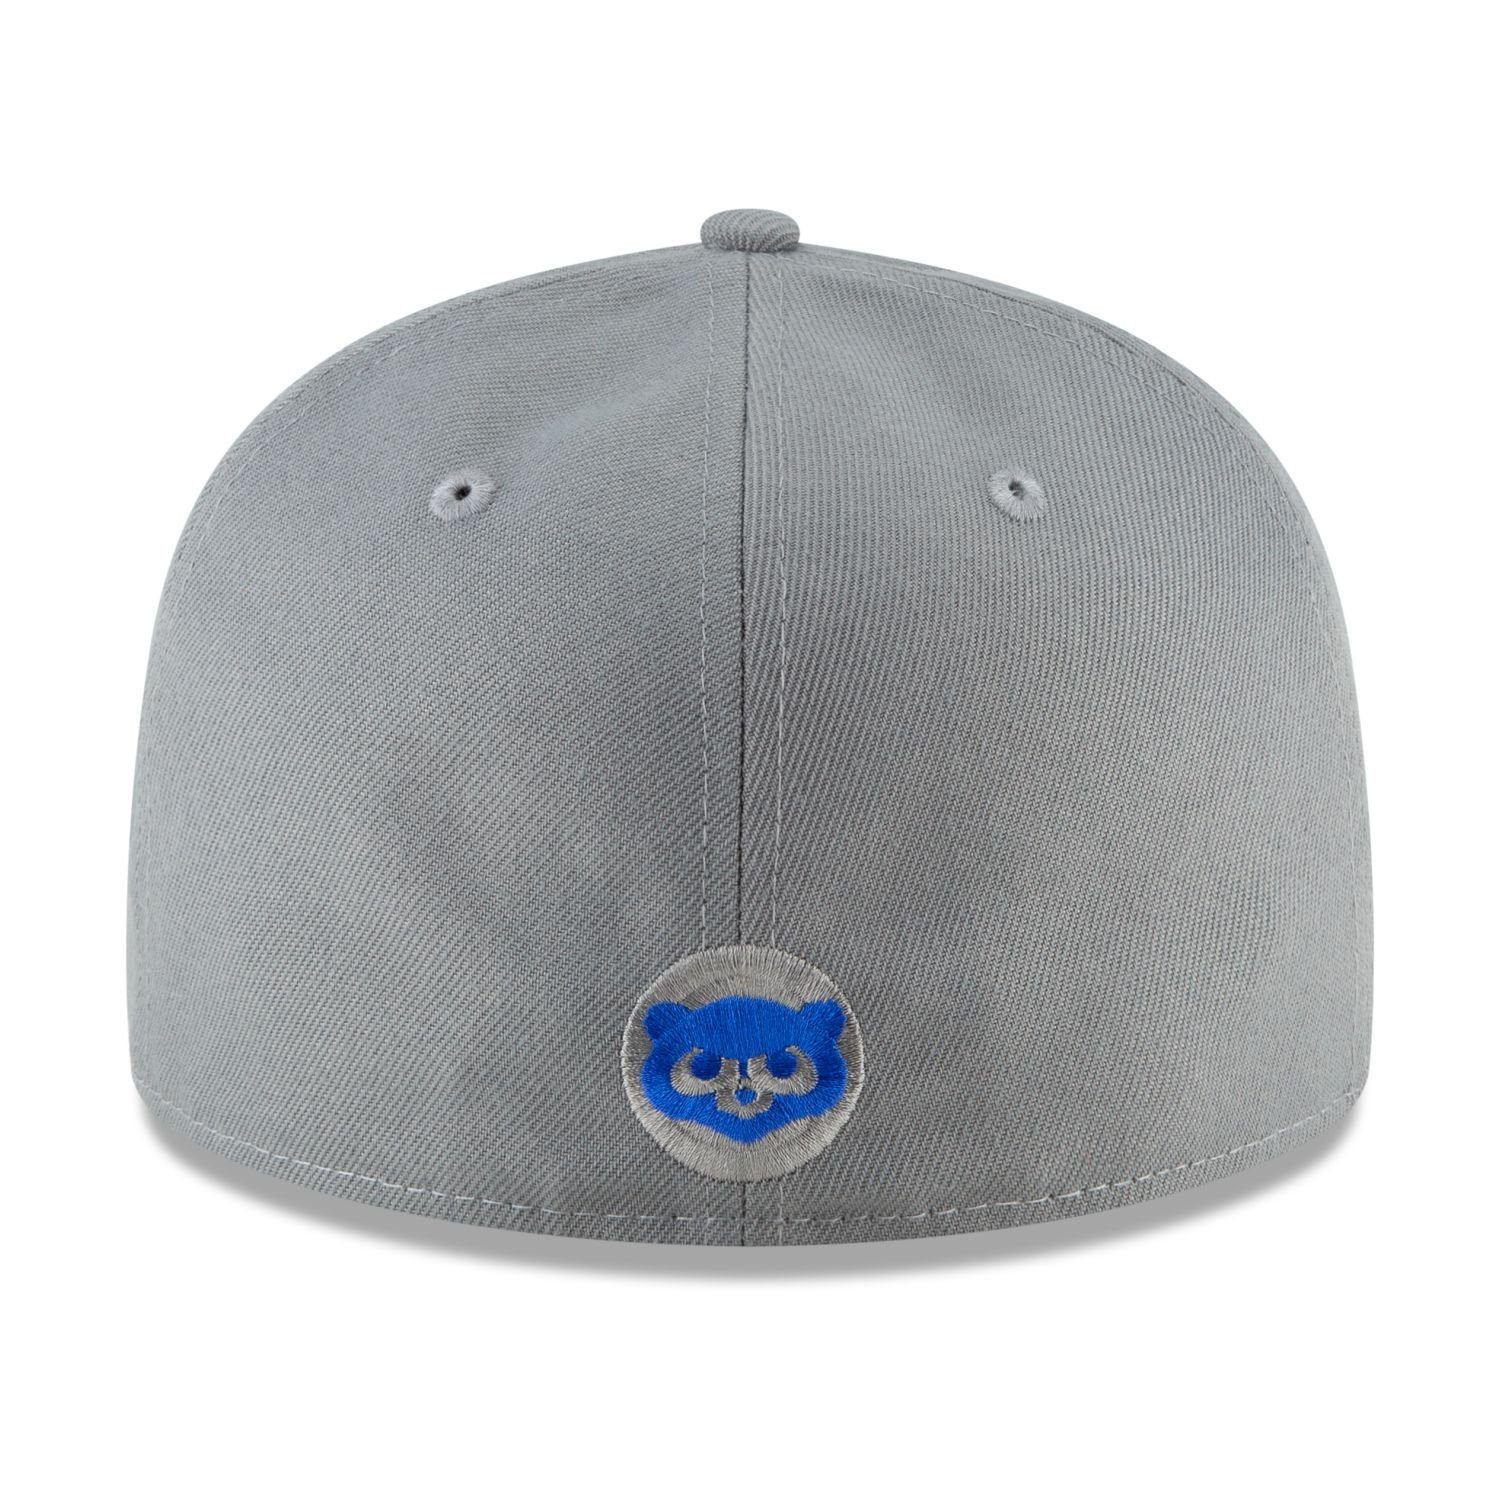 59Fifty Cap STORM Fitted Team New Cooperstown Era Cubs MLB Chicago GREY